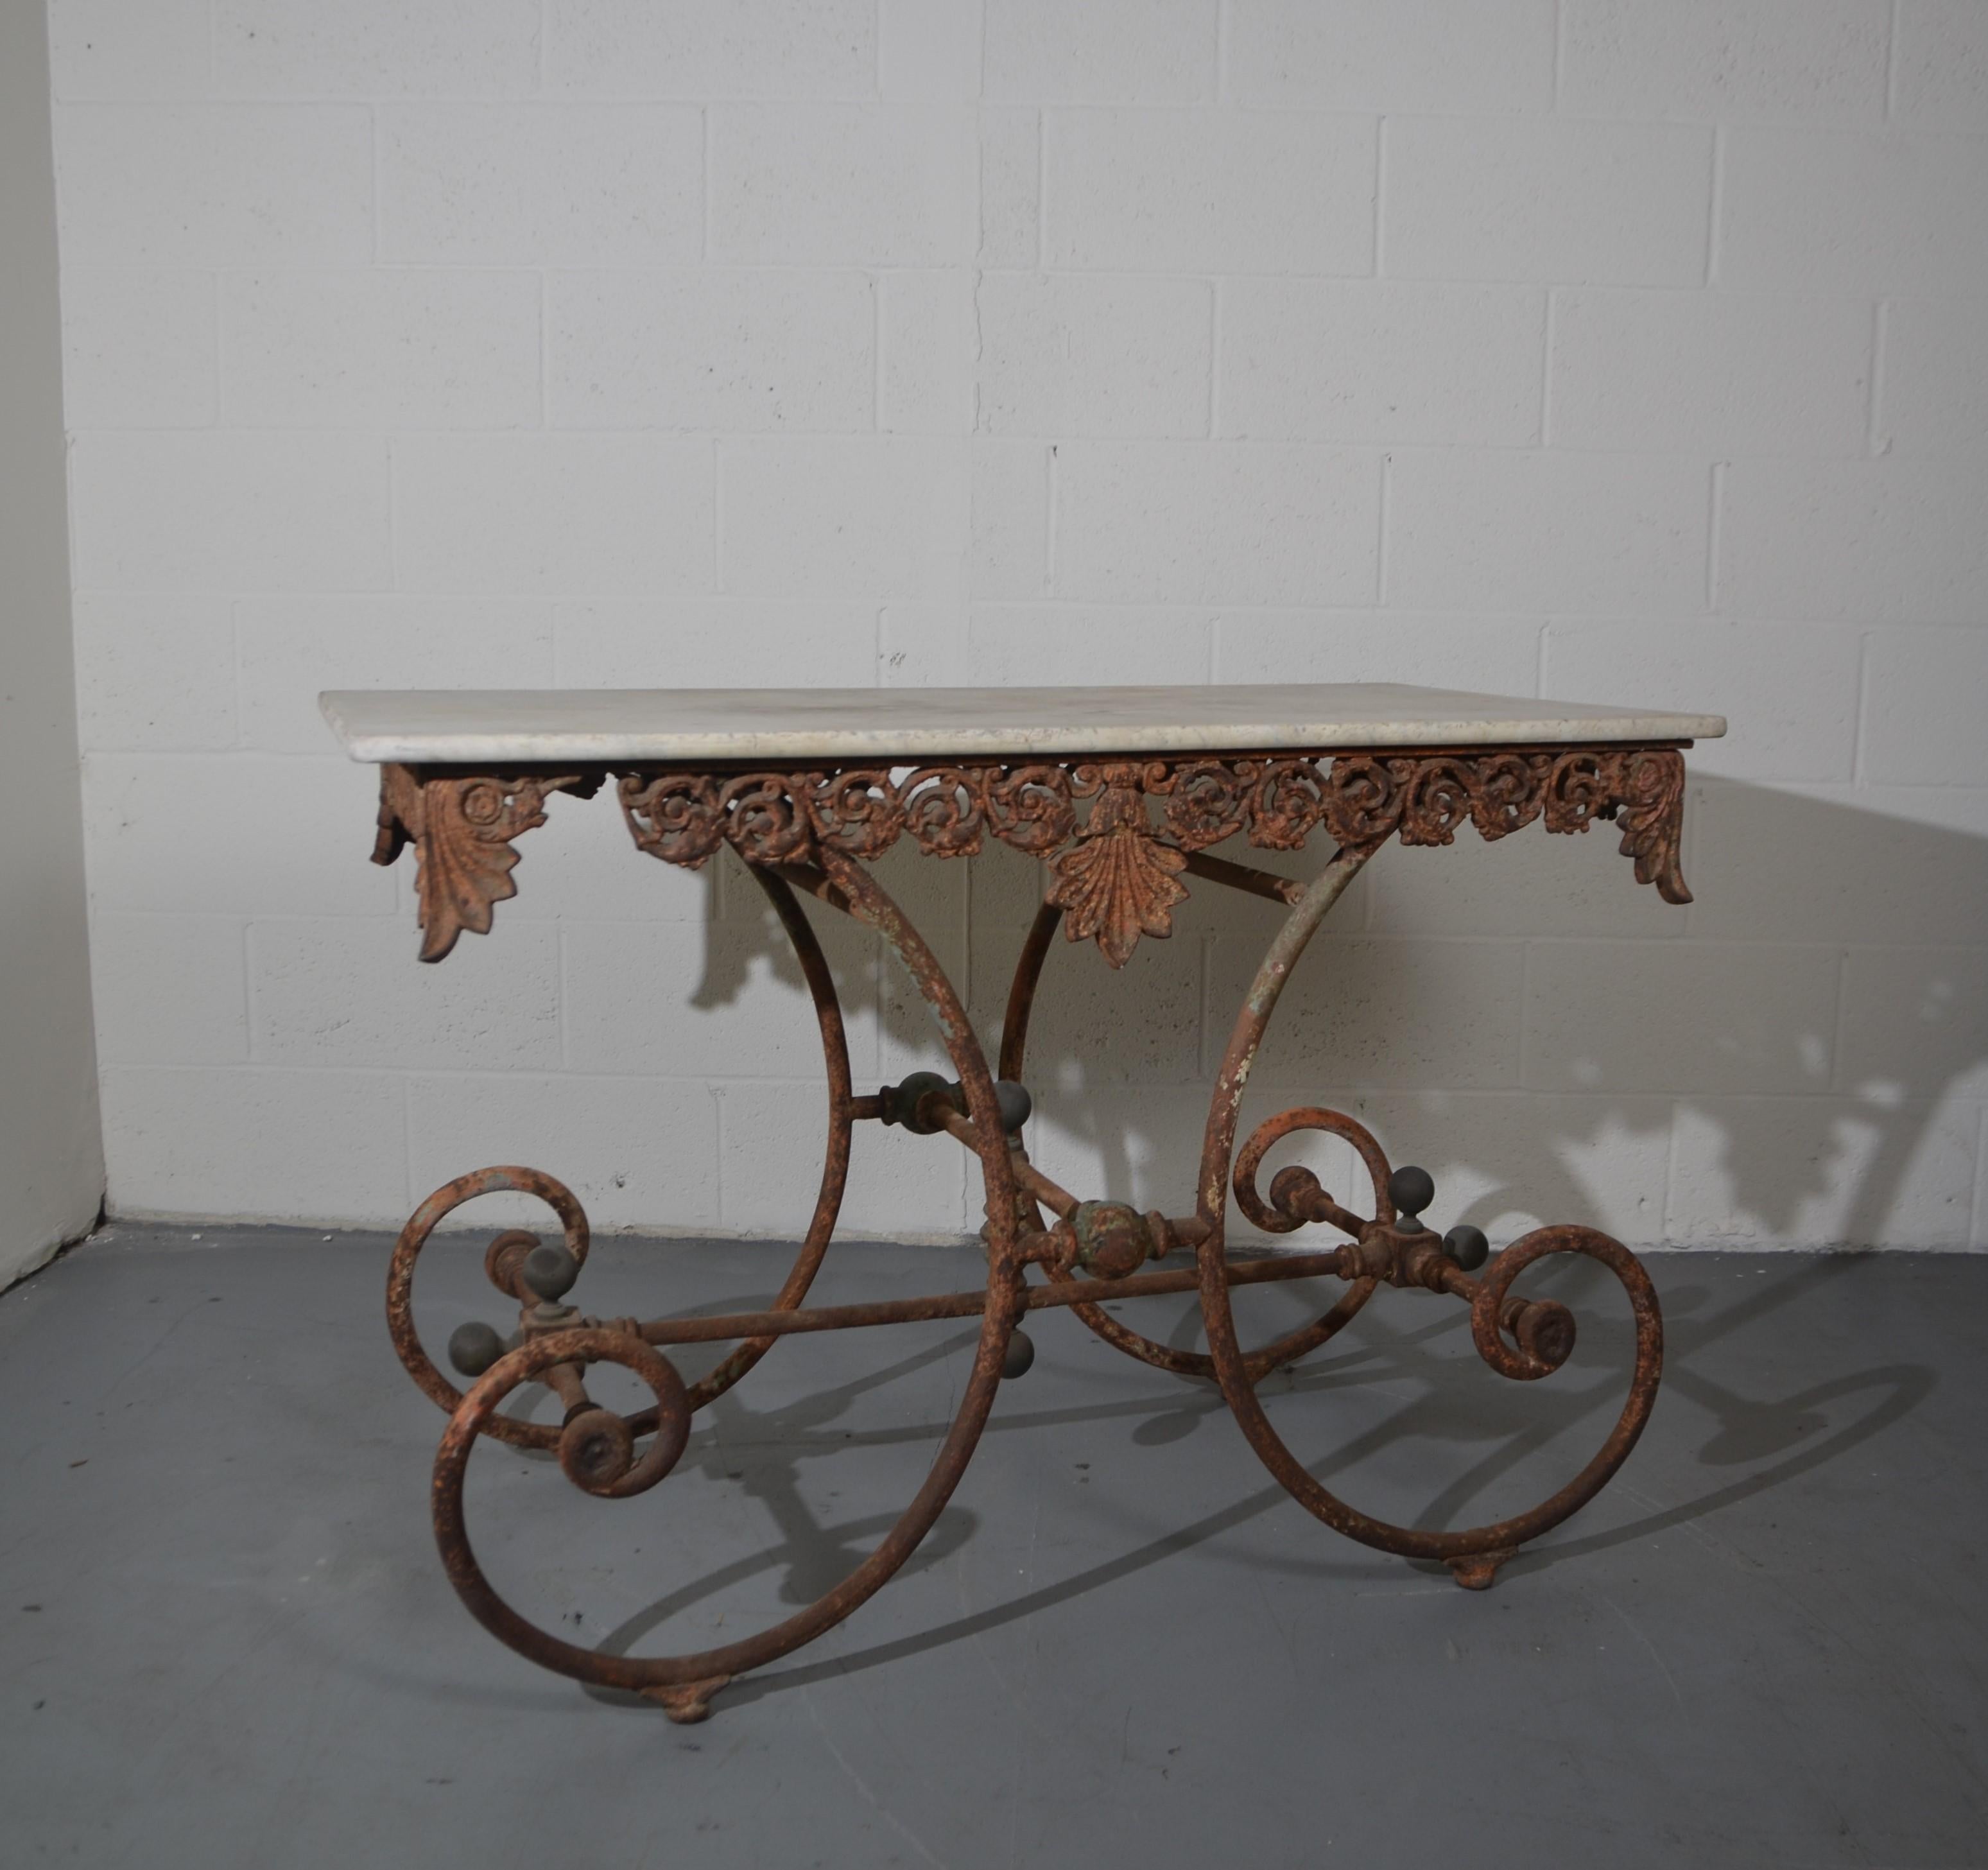 Rustic 19th-century French bistro table. The top is stone the base is iron.